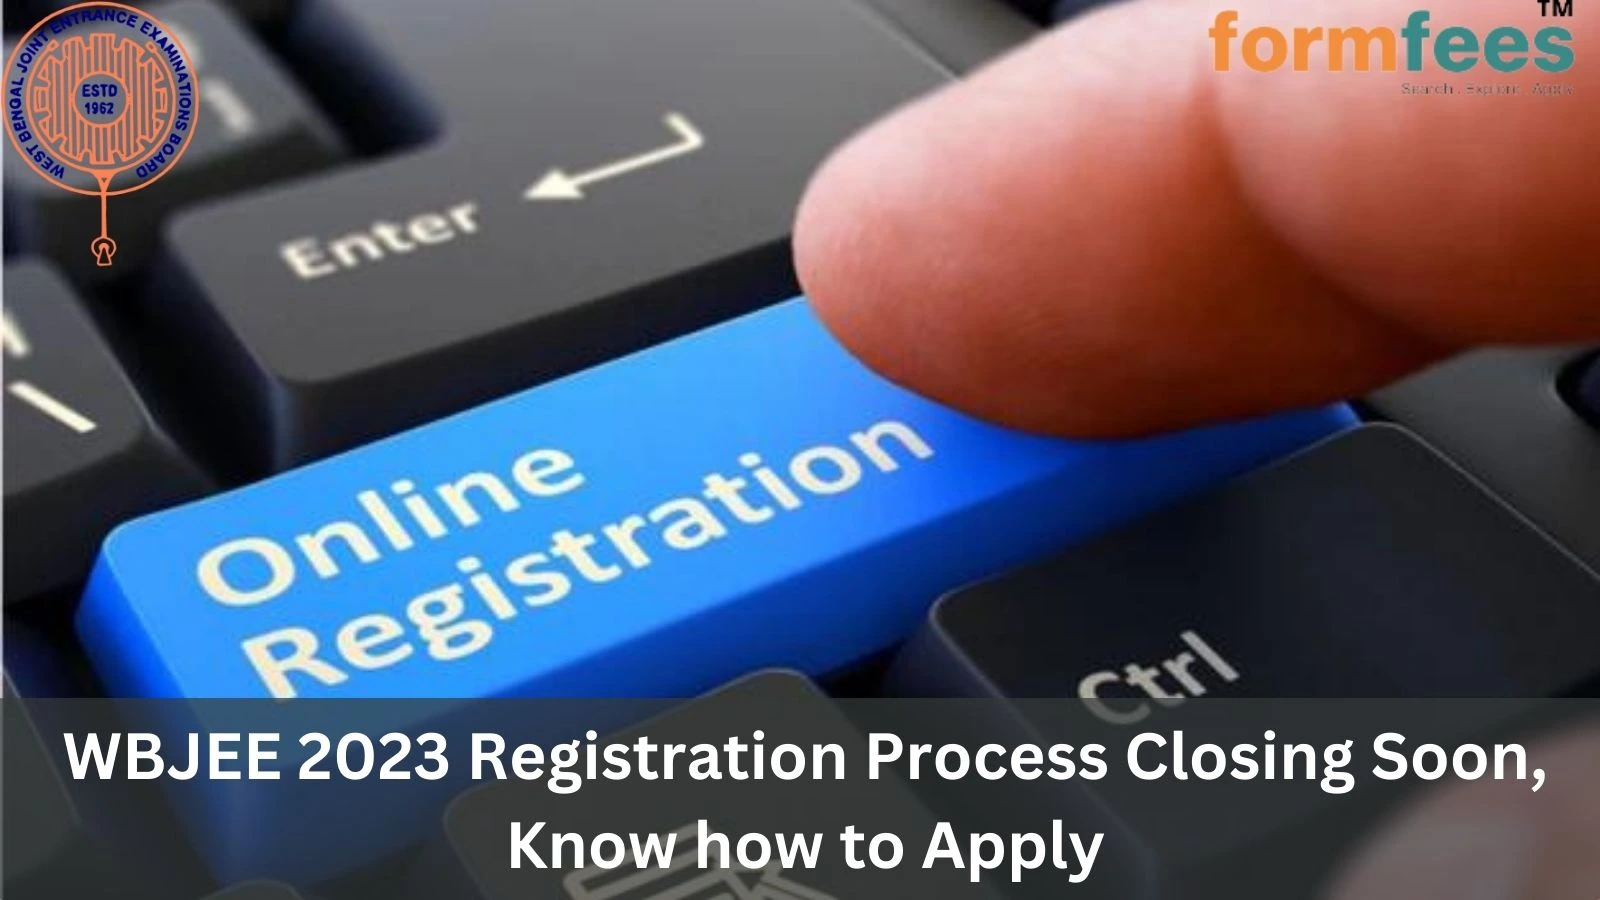 WBJEE 2023 Registration Process Closing Soon ; Know how to Apply here